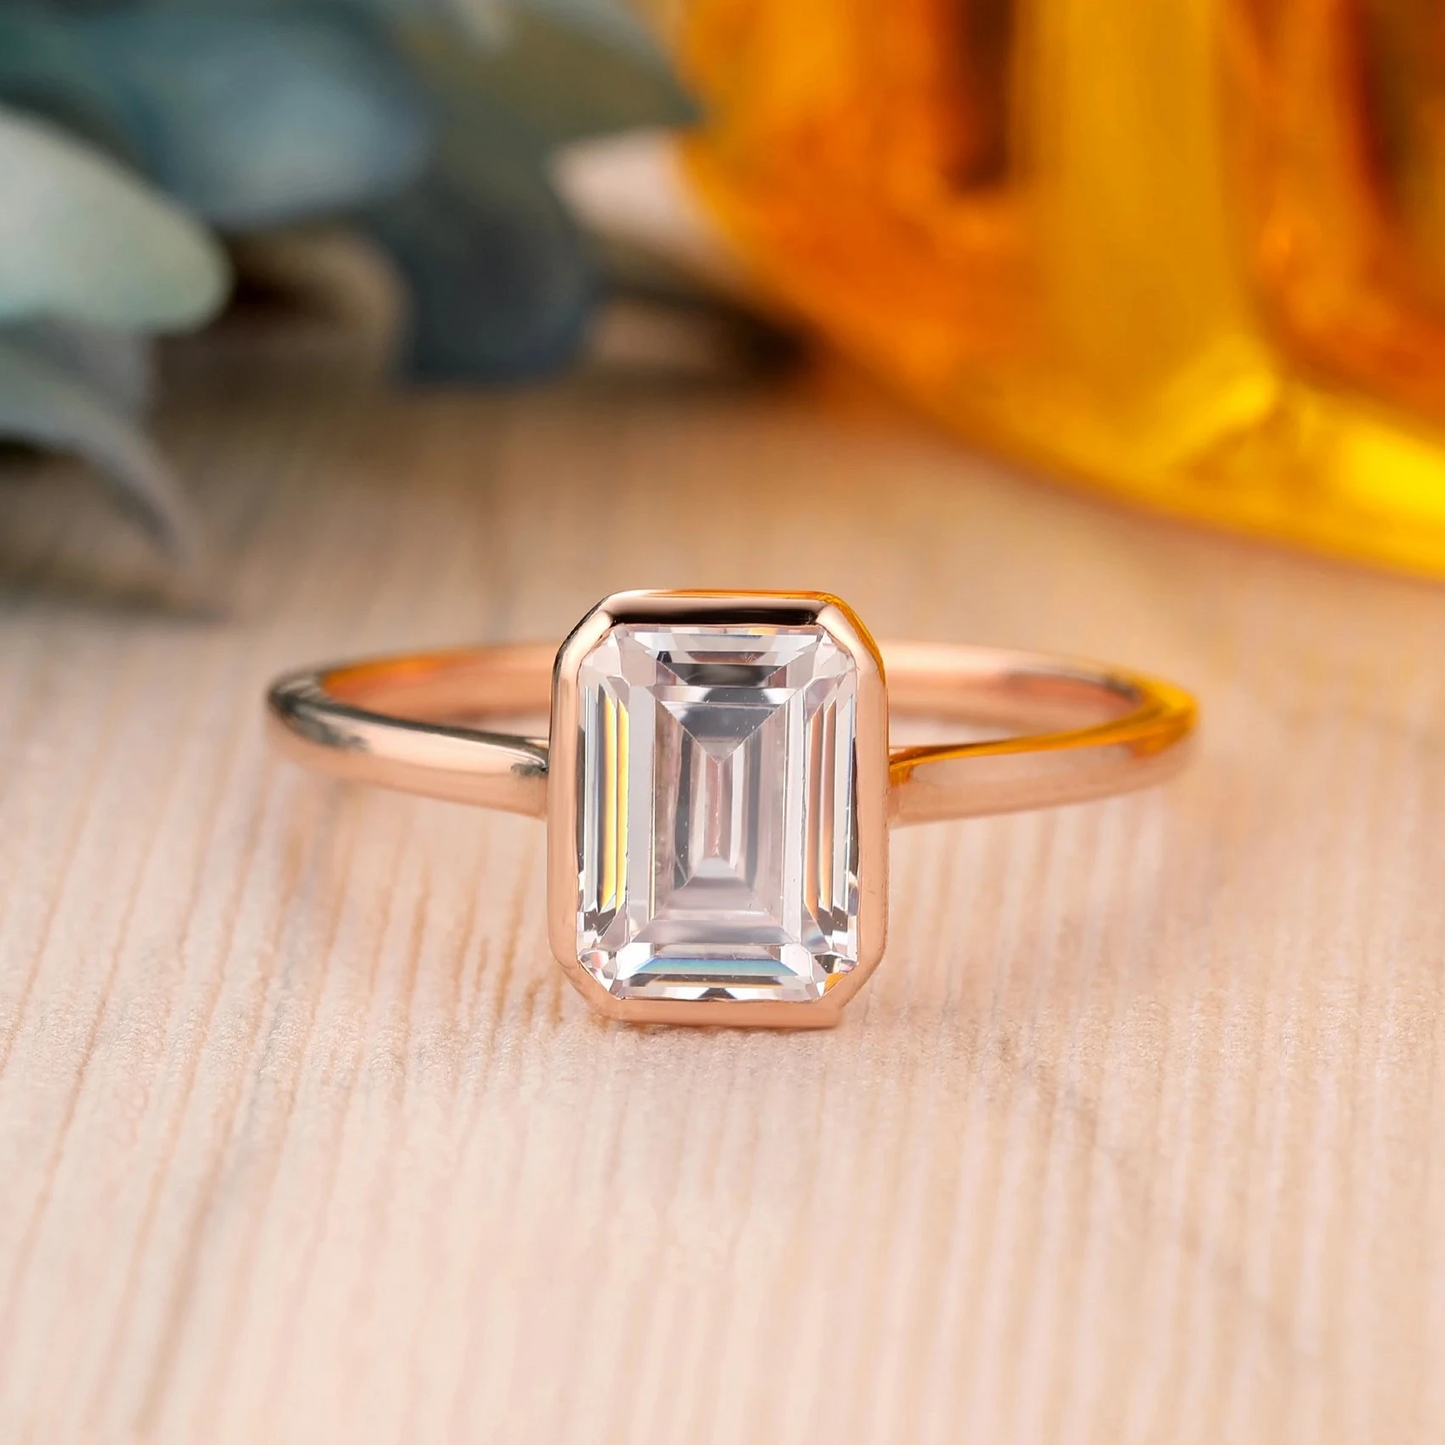 2CT Emerald Cut Moissanite Solitaire Ring, 14K Yellow Gold Engagement Ring, Bezel Setting, Statement Ring, Gift For Her, Anniversary Ring